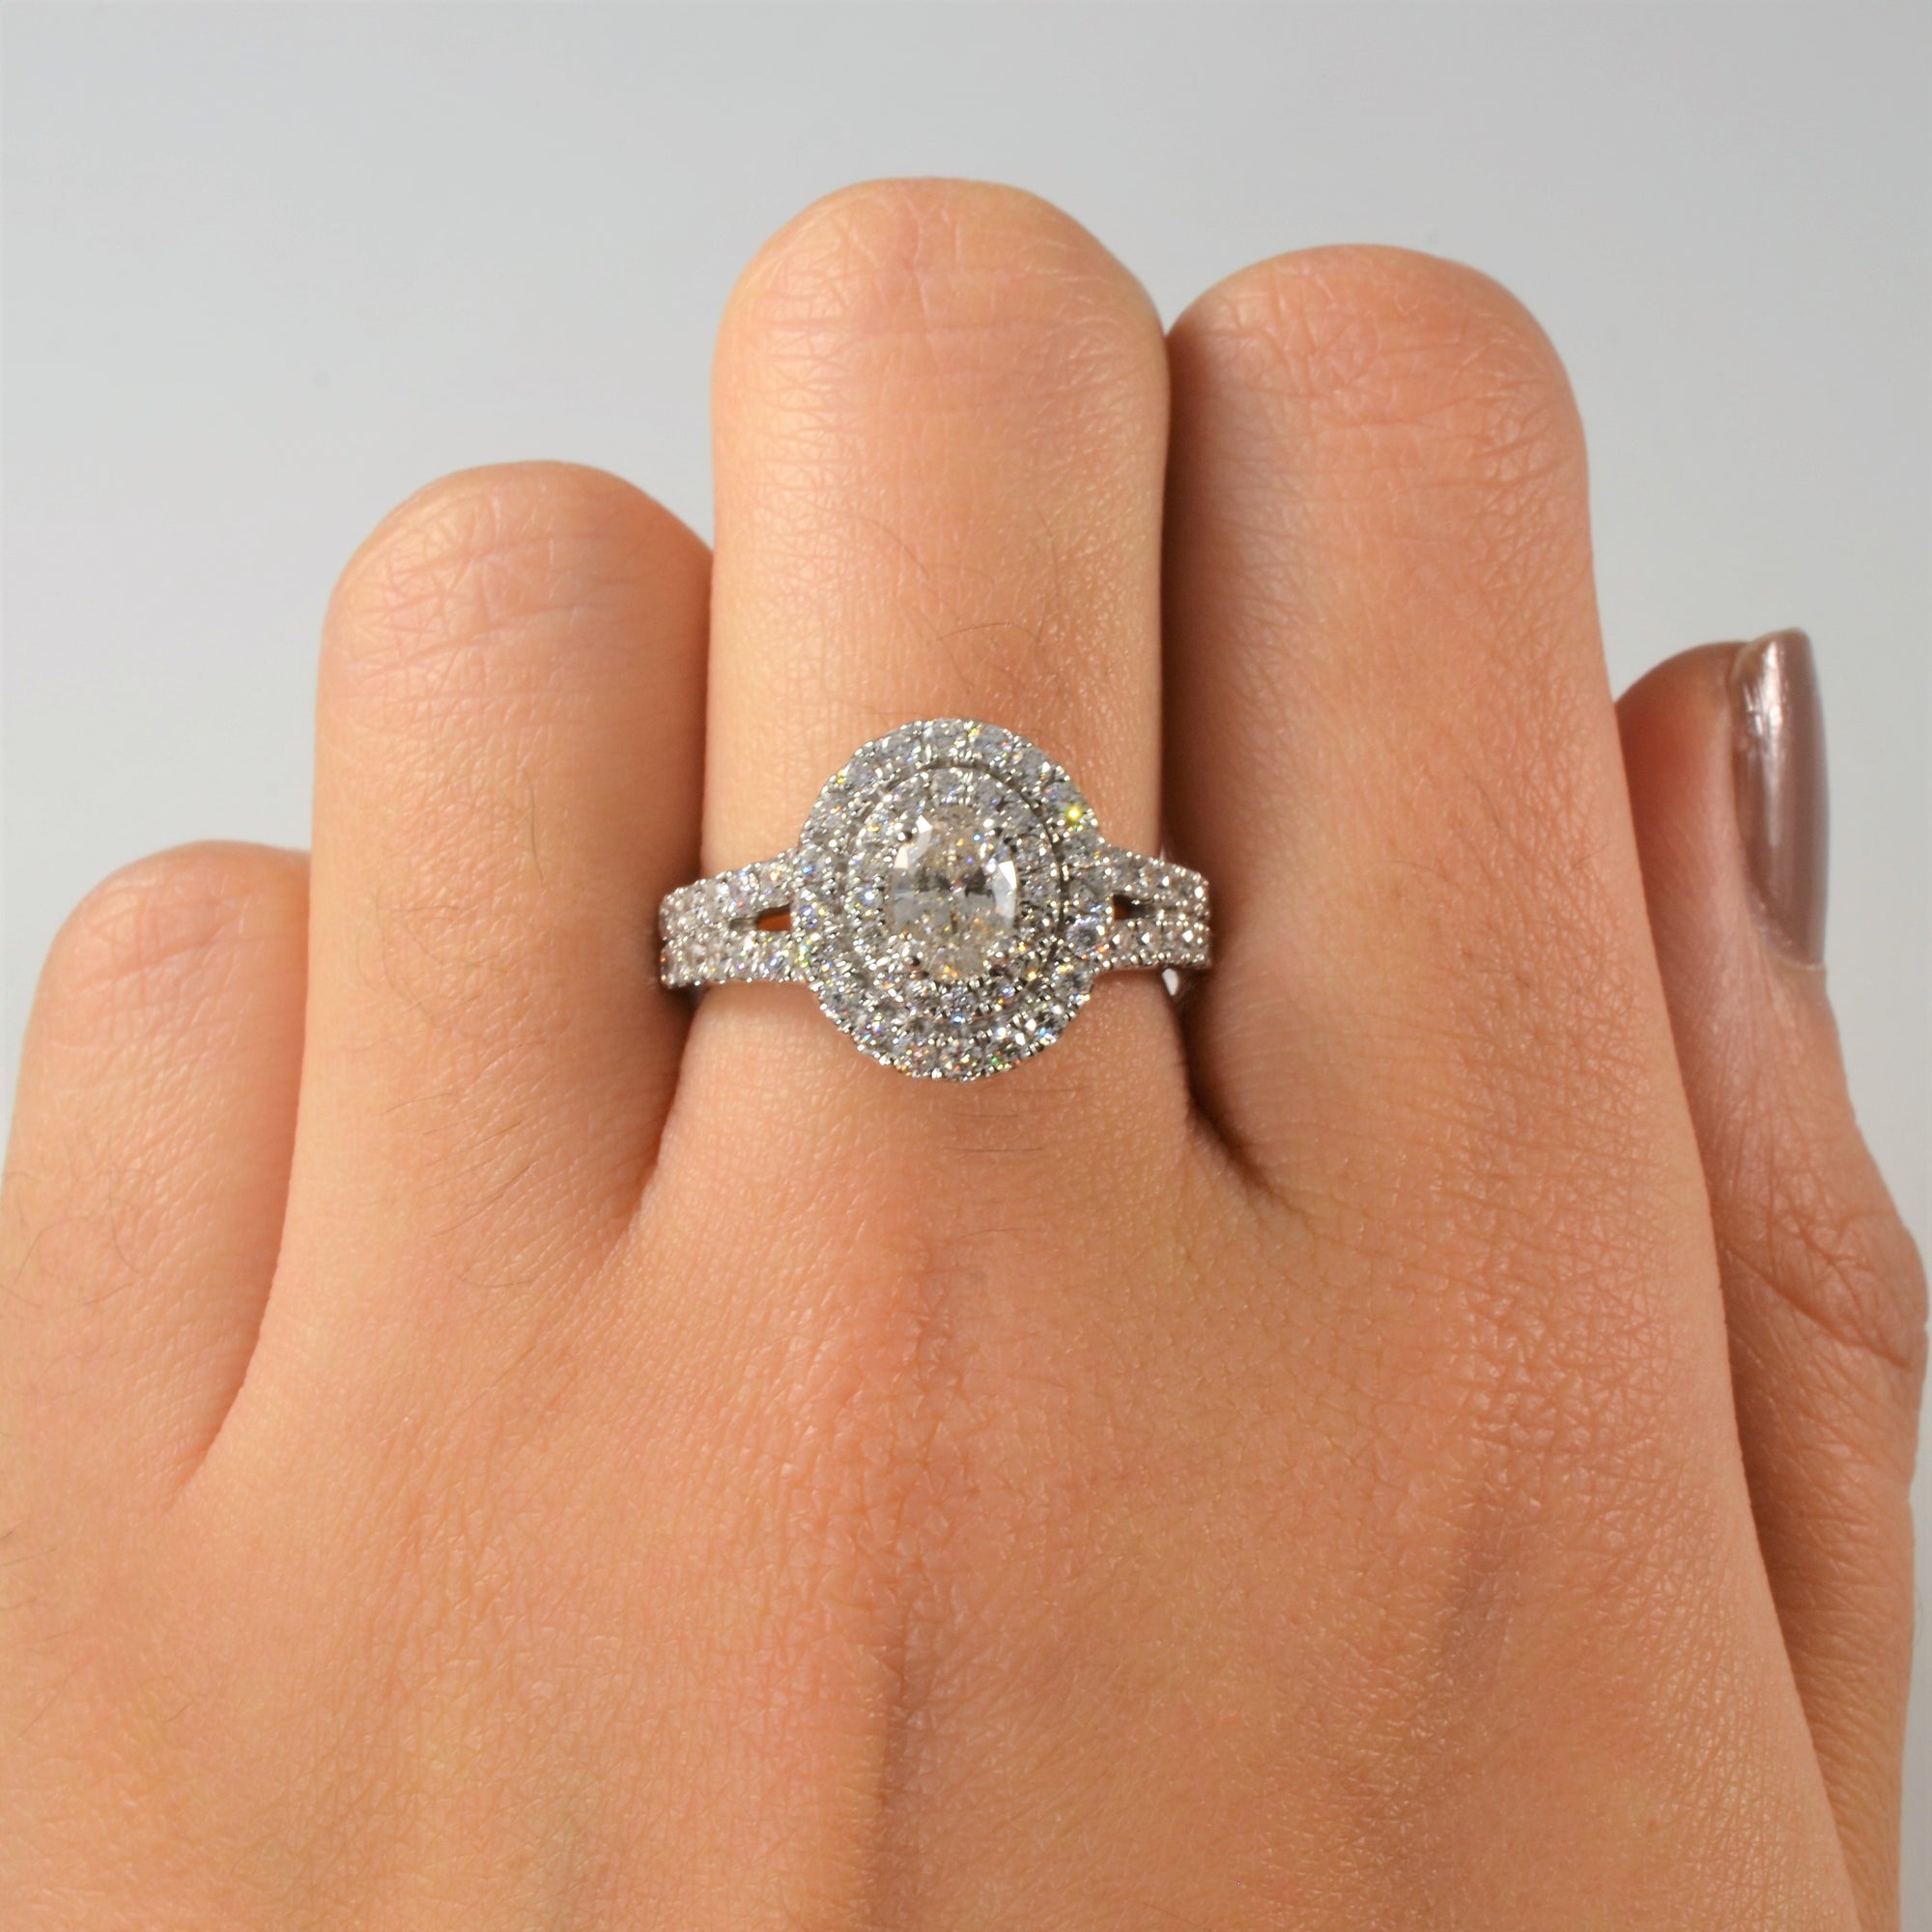 'Vera Wang' Double Halo Oval Engagement Ring | 1.18ctw | SZ 6.5 |